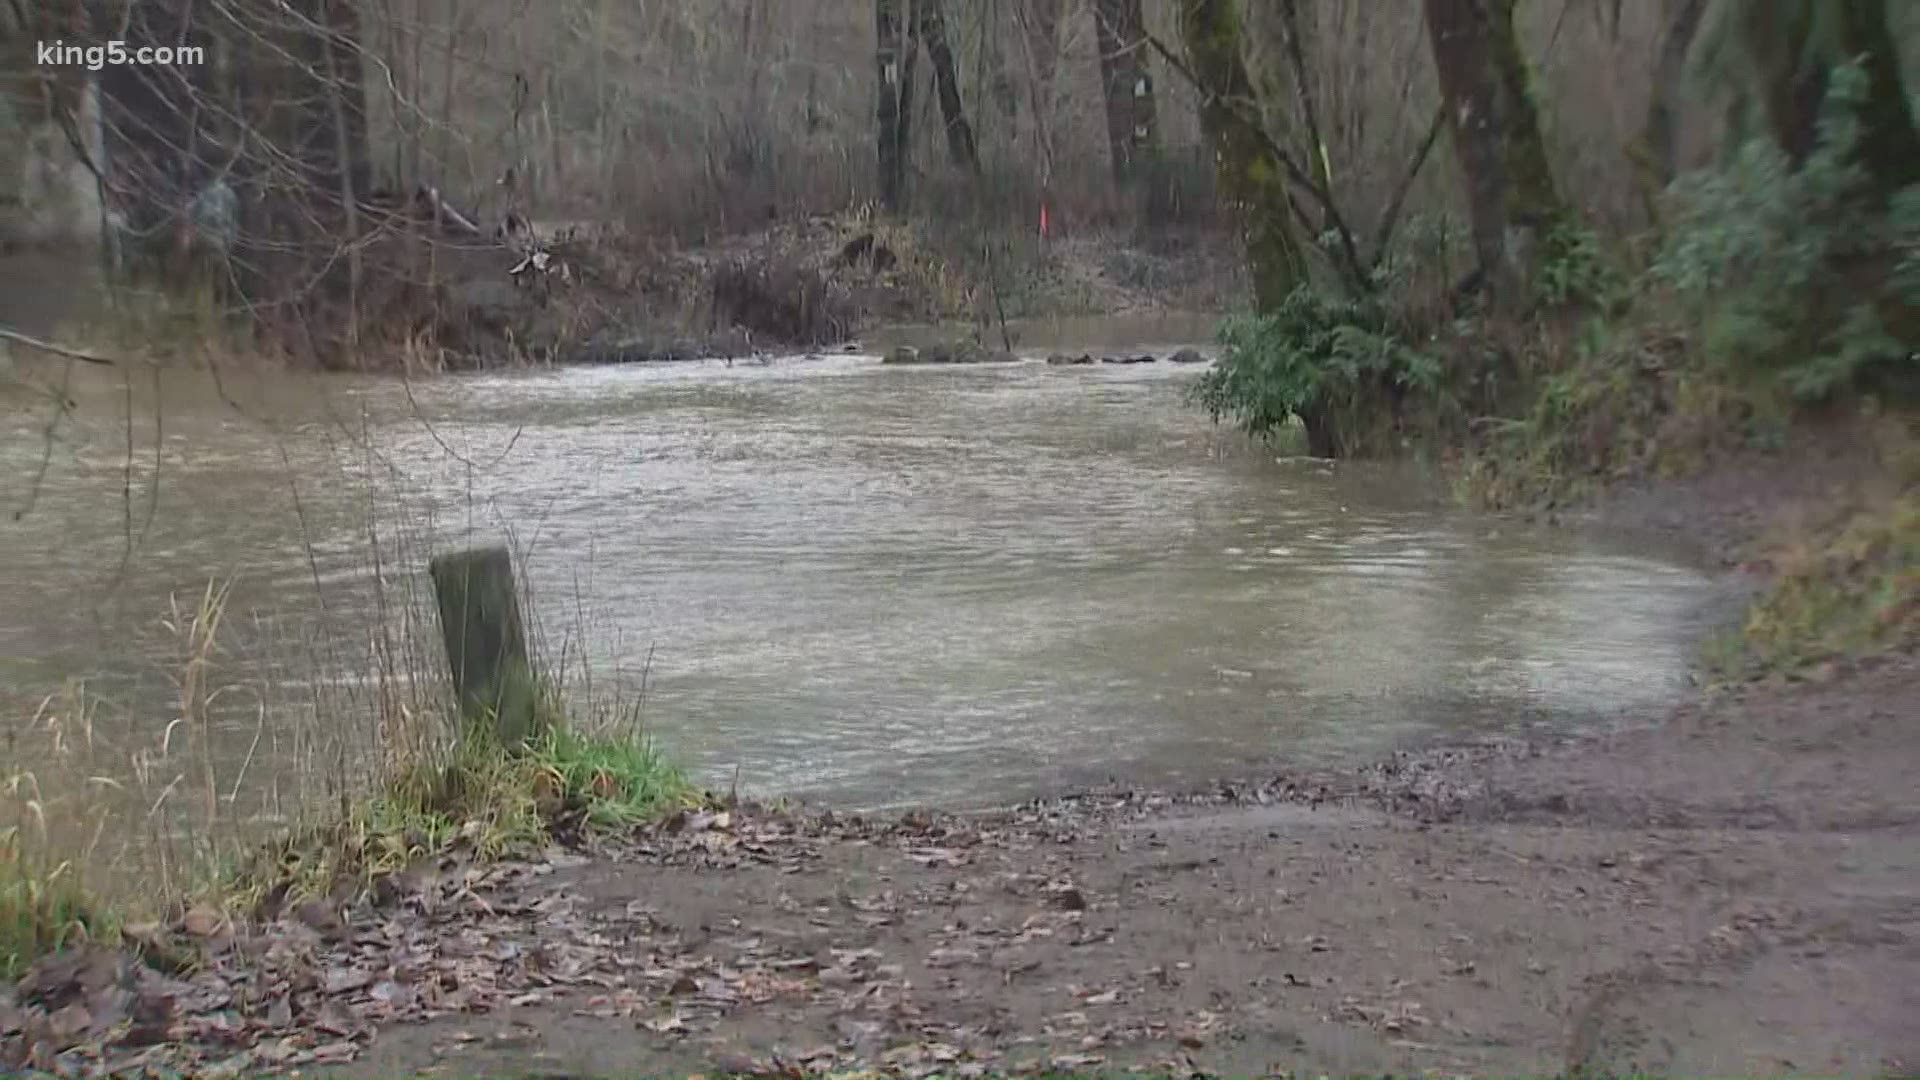 The Green, Nisqually, Tolt and White rivers could hit a minor flood stage this week after days of heavy rain.